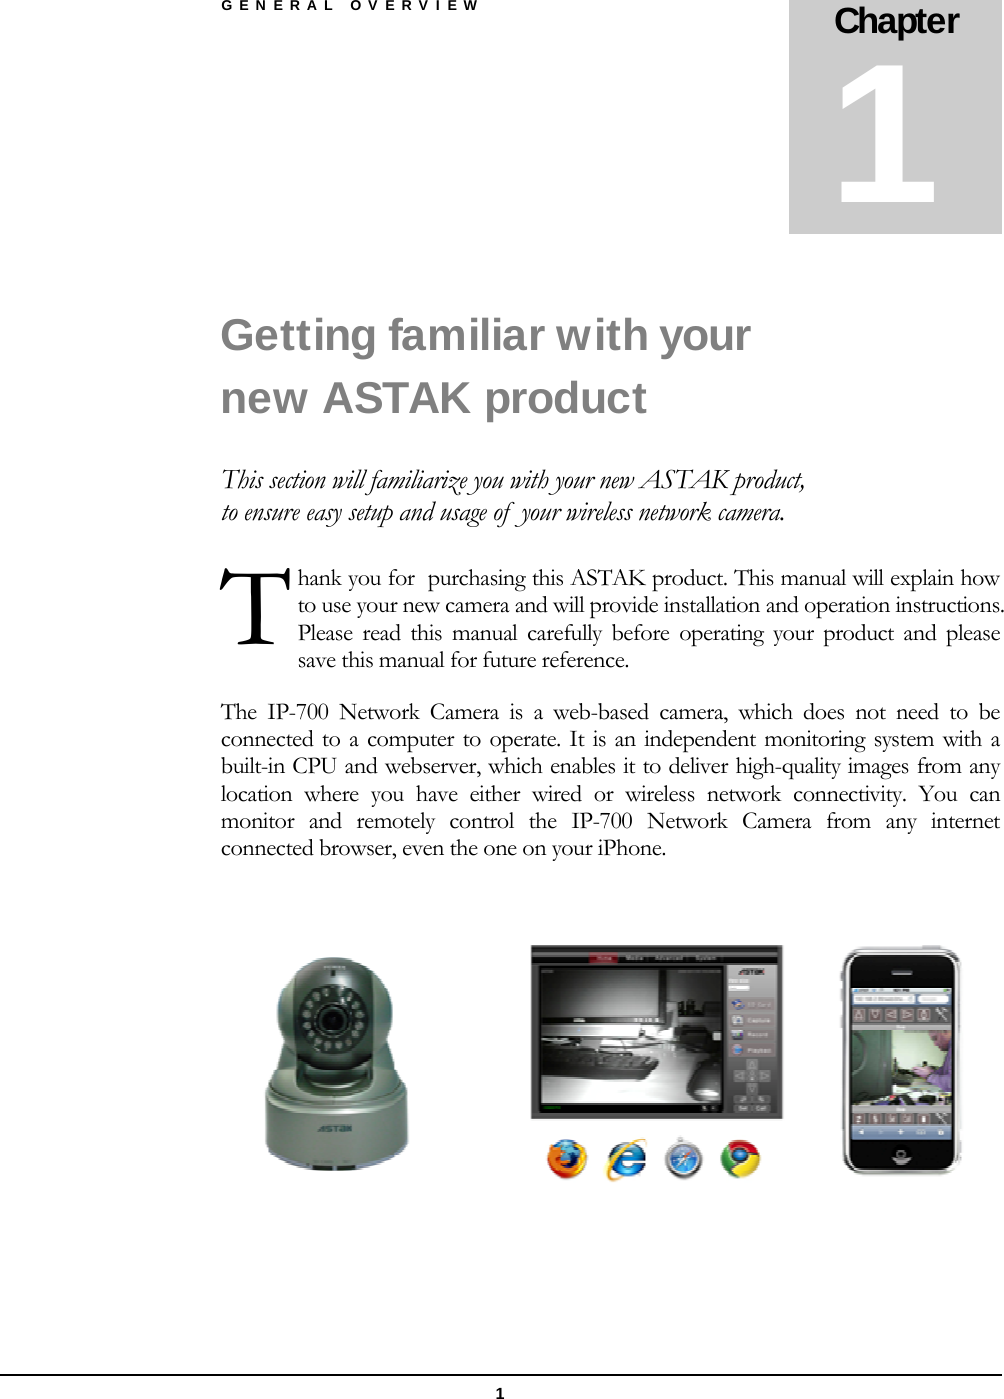 GENERAL OVERVIEW 1 Getting familiar with your new ASTAK product This section will familiarize you with your new ASTAK product, to ensure easy setup and usage of  your wireless network camera. hank you for  purchasing this ASTAK product. This manual will explain how to use your new camera and will provide installation and operation instructions. Please read this manual carefully before operating your product and please save this manual for future reference. The IP-700 Network Camera is a web-based camera, which does not need to be connected to a computer to operate. It is an independent monitoring system with a built-in CPU and webserver, which enables it to deliver high-quality images from any location where you have either wired or wireless network connectivity. You can monitor and remotely control the IP-700 Network Camera from any internet connected browser, even the one on your iPhone.       Chapter 1 T 